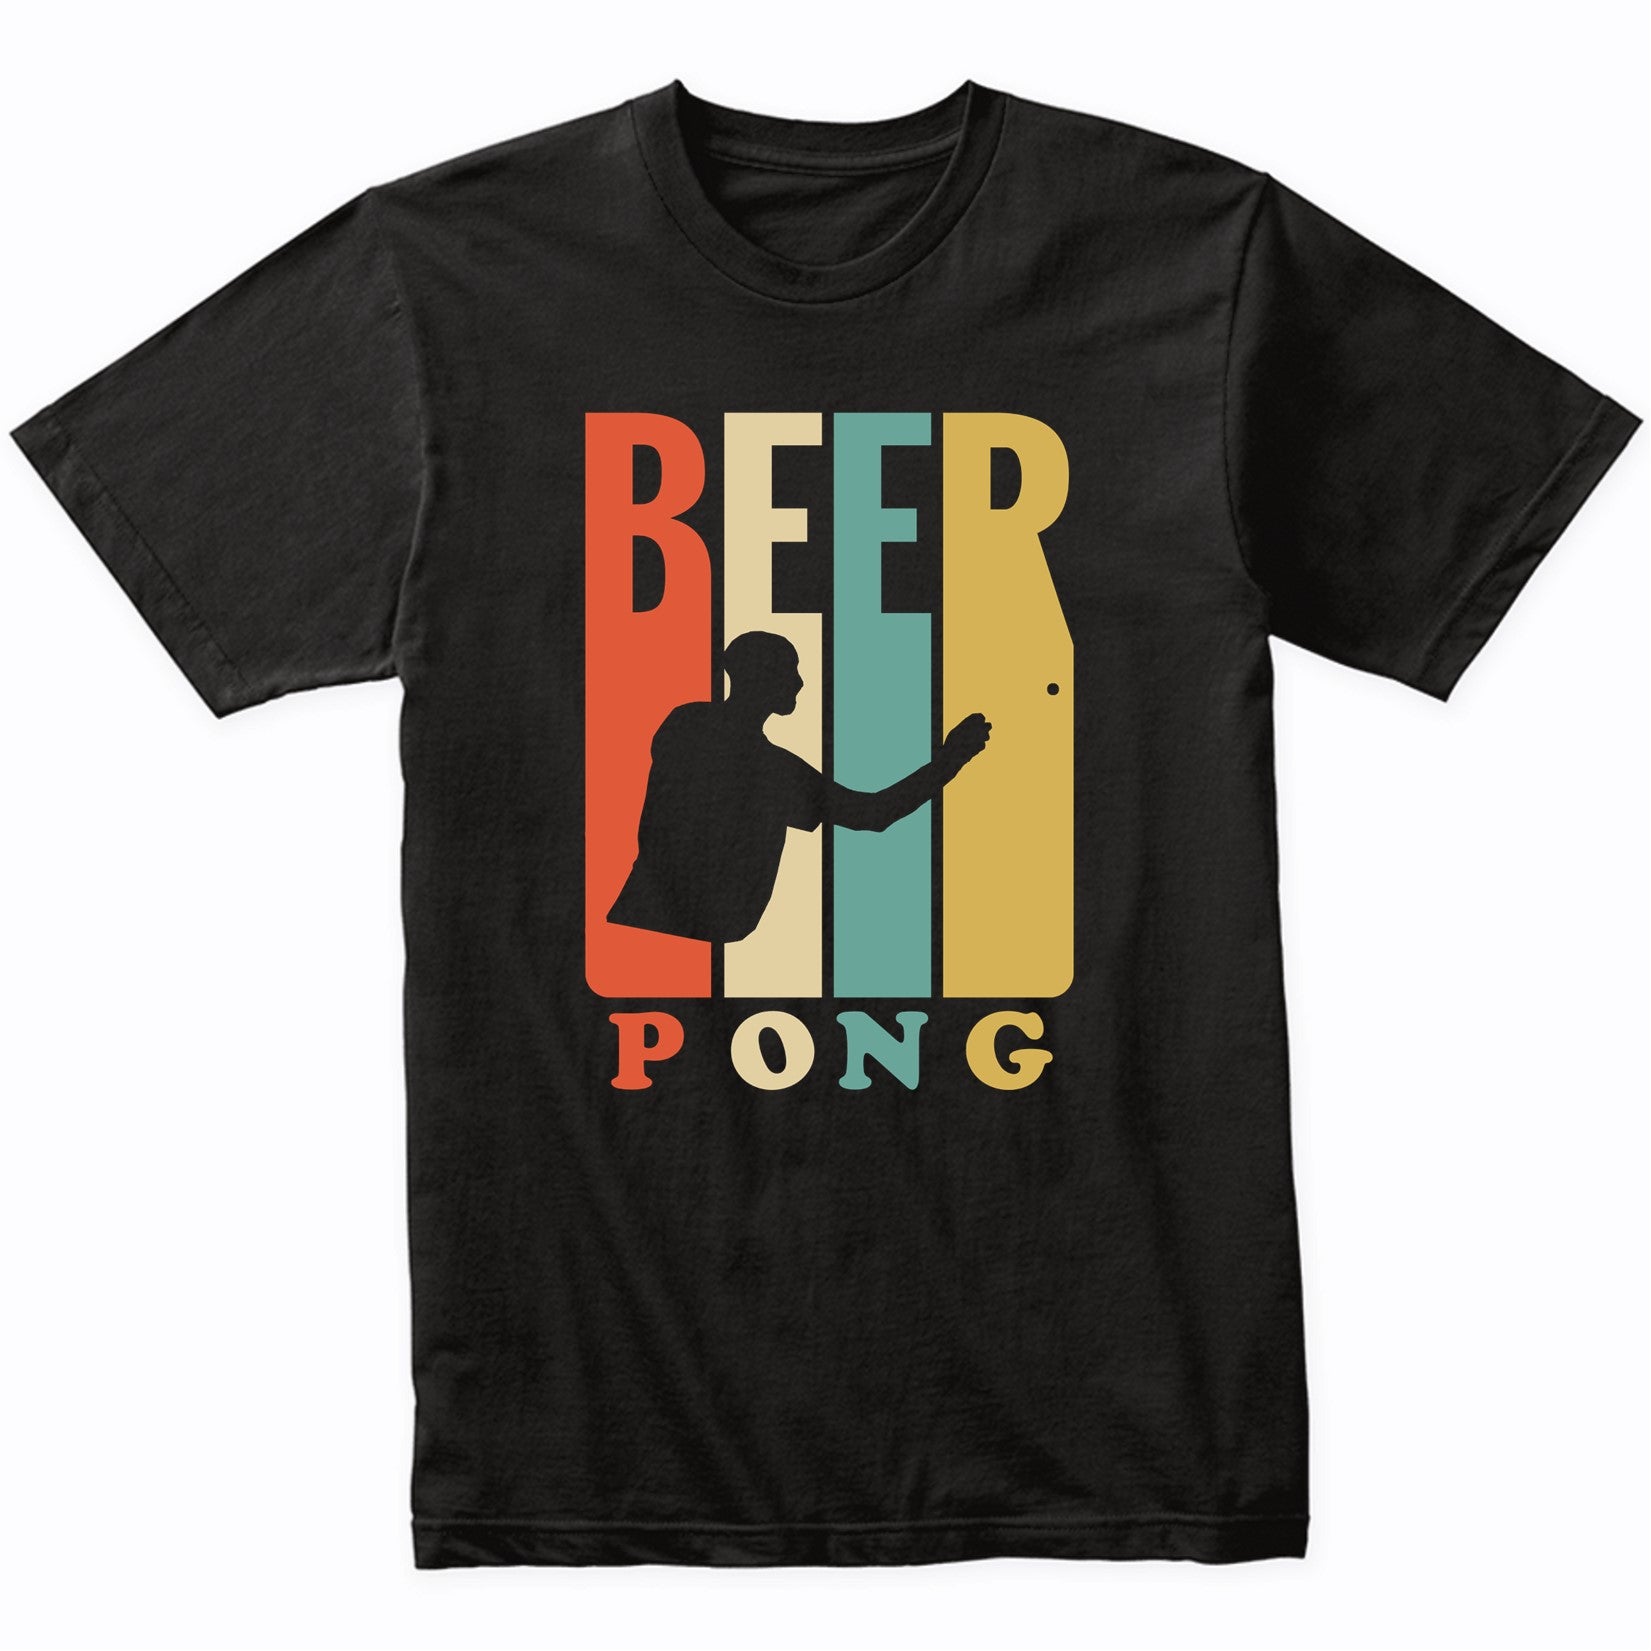 Vintage Retro 1970's Style Beer Pong T-Shirt